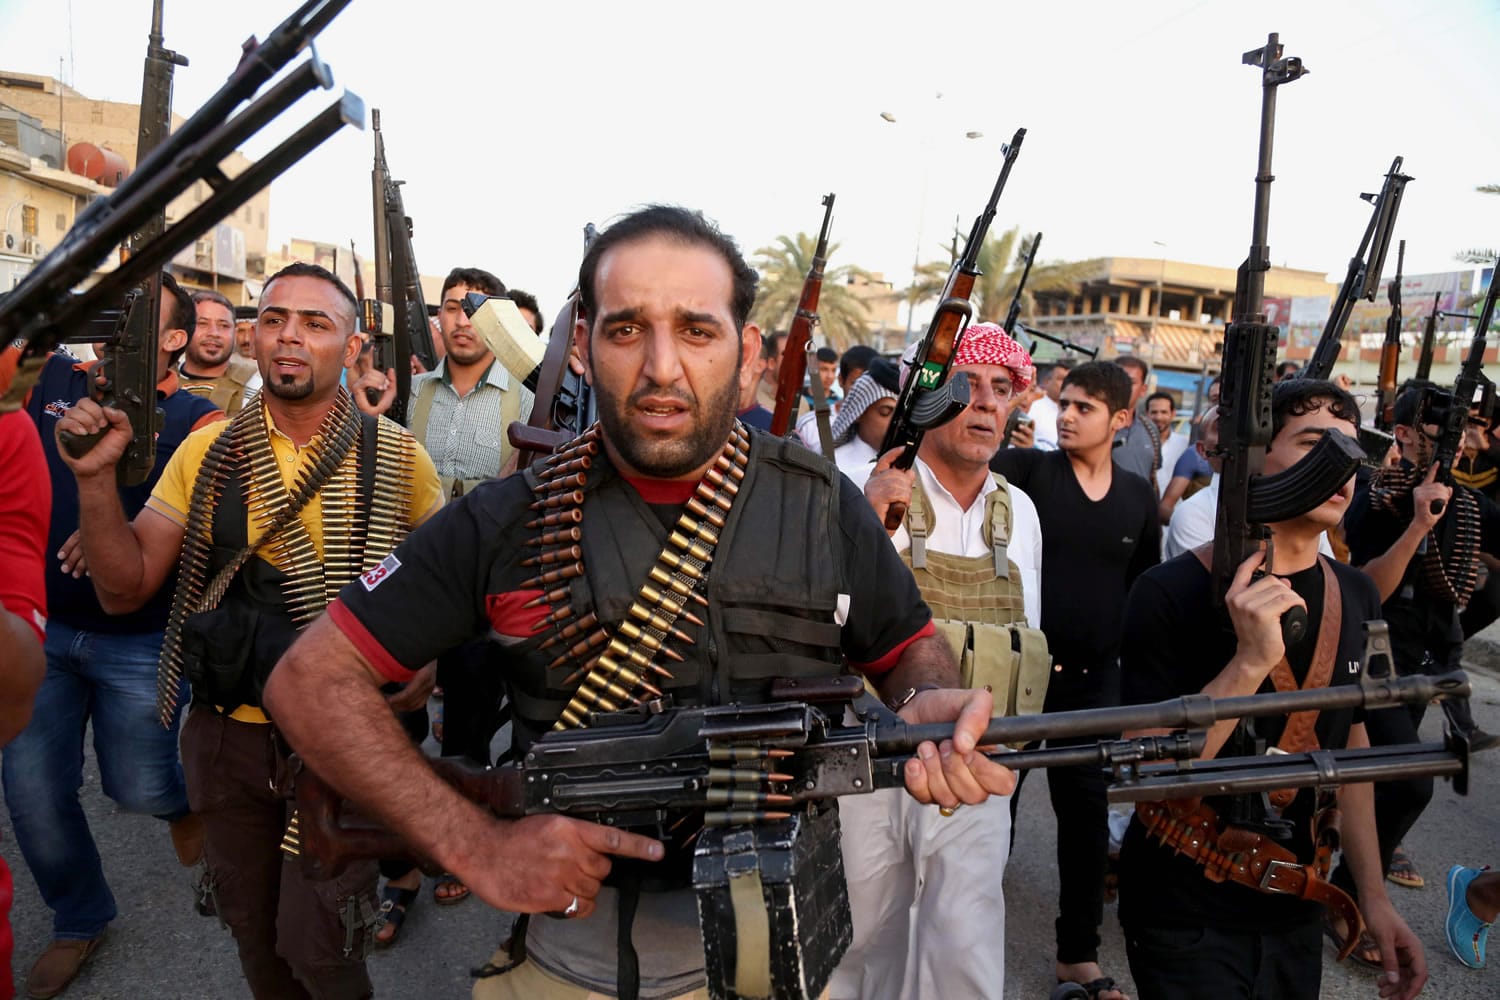 Iraqi Shiite tribal fighters deploy with their weapons while chanting slogans against the al-Qaida-inspired Islamic State of Iraq and the Levant (ISIL),  to help the military, which defends the capital in Baghdad's Sadr City, Iraq, Friday, June 13, 2014.